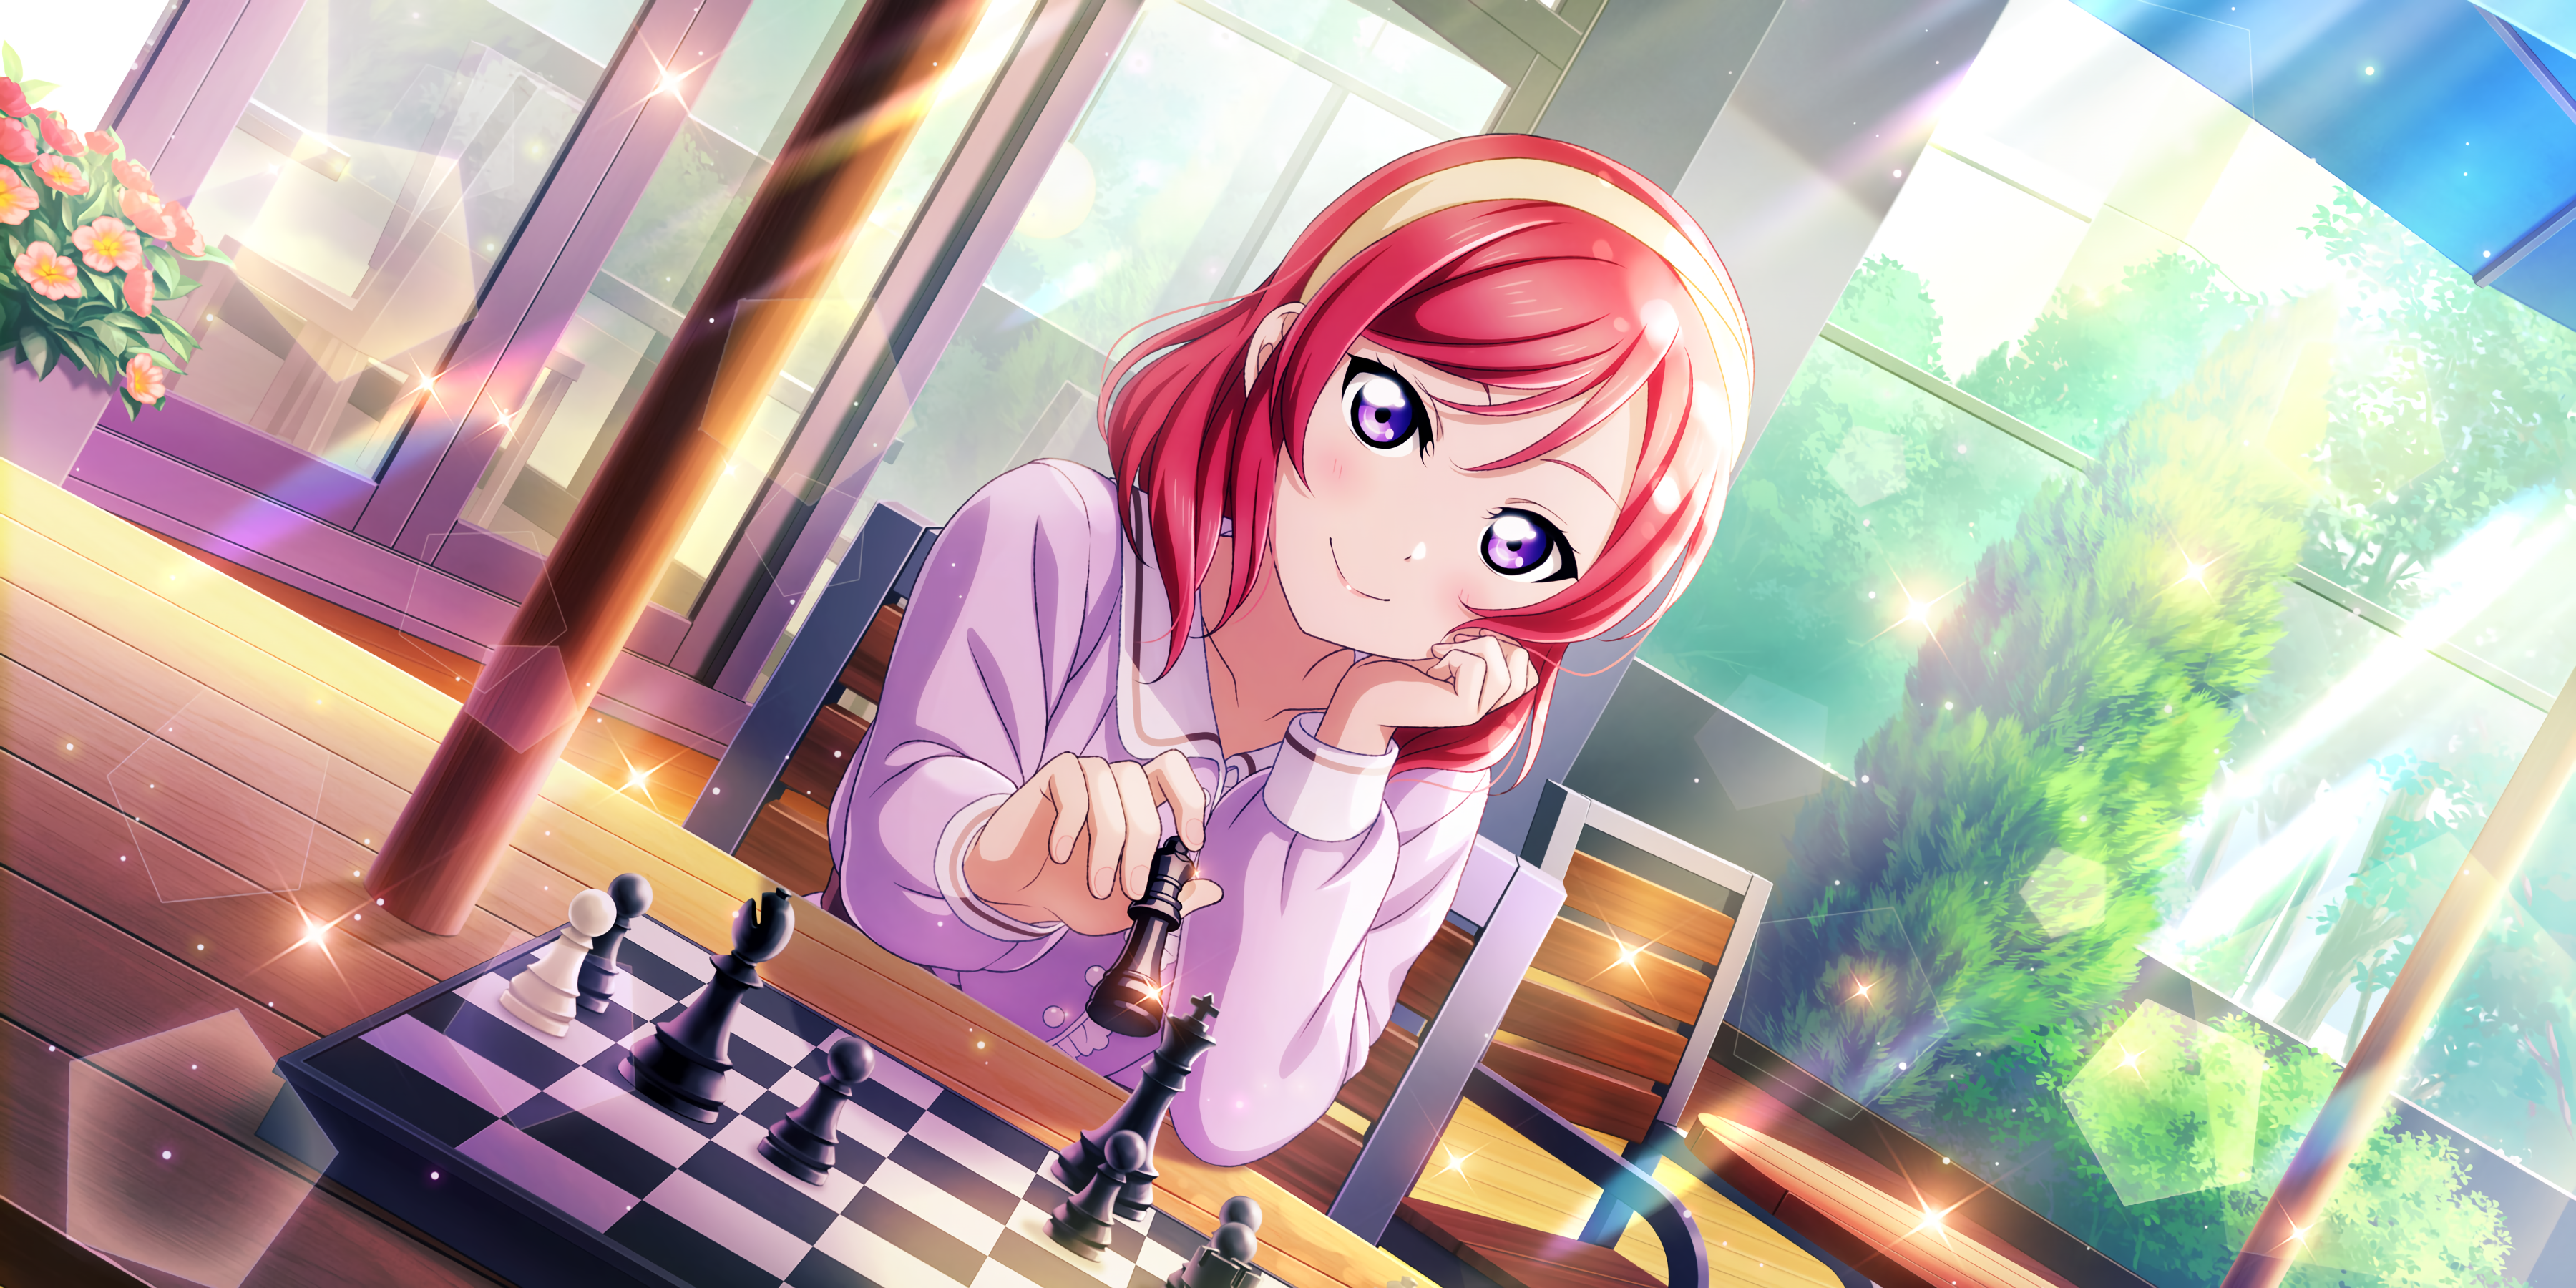 maki 🤍 - hshdhd I was having a hard time editing these pics bc the  originals were low quality ;-; I apologize for the weird remini…